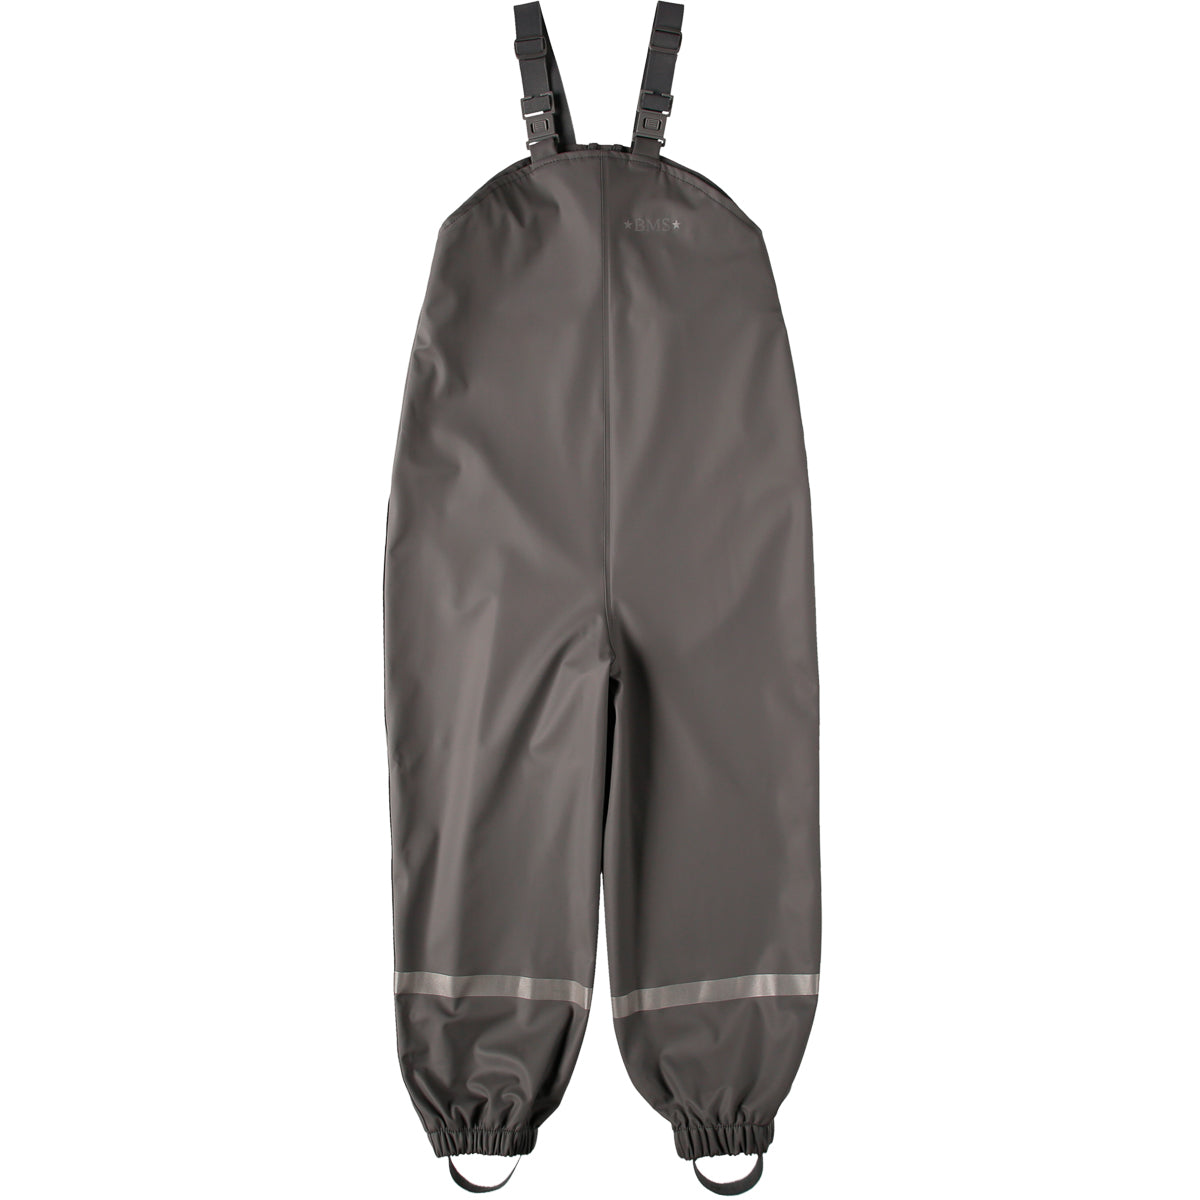 Load image into Gallery viewer, BMS Child Softskin Rain Pant with Bib - SALE - 30% OFF
